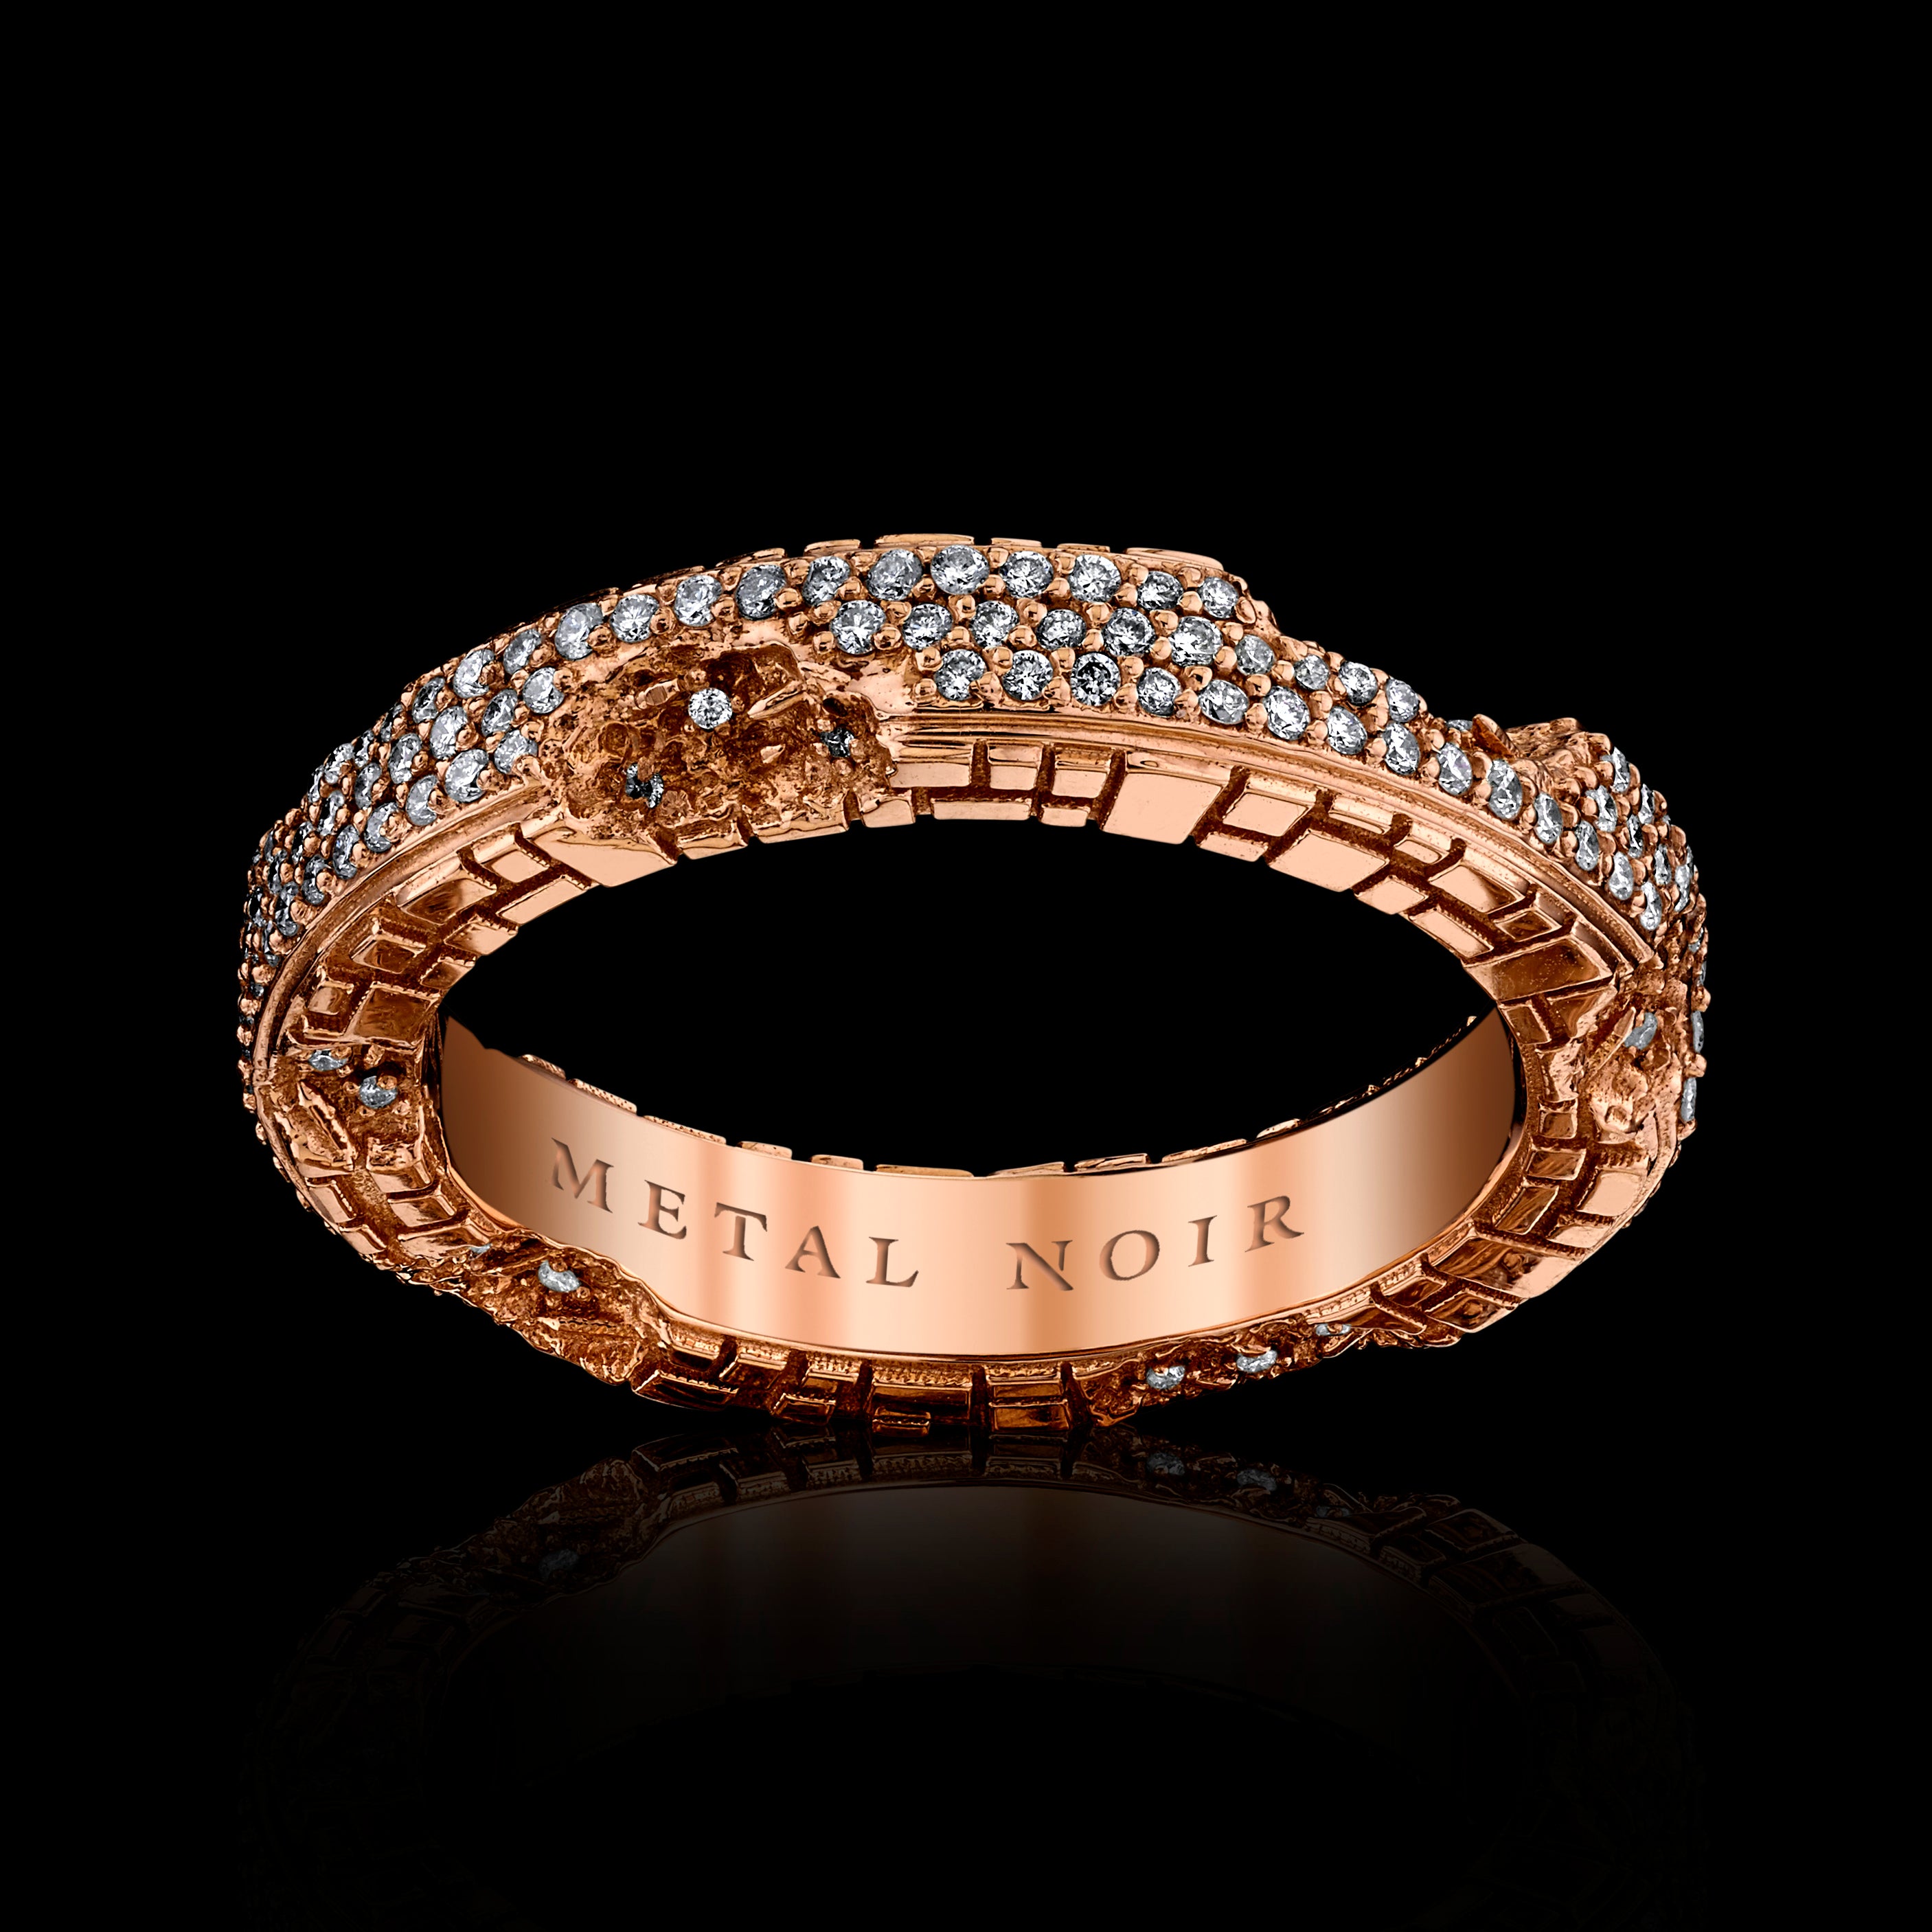 ‘Eroded Architecture’ Ring in solid 18k rose gold with pave set round brilliant diamonds • Edition of 30